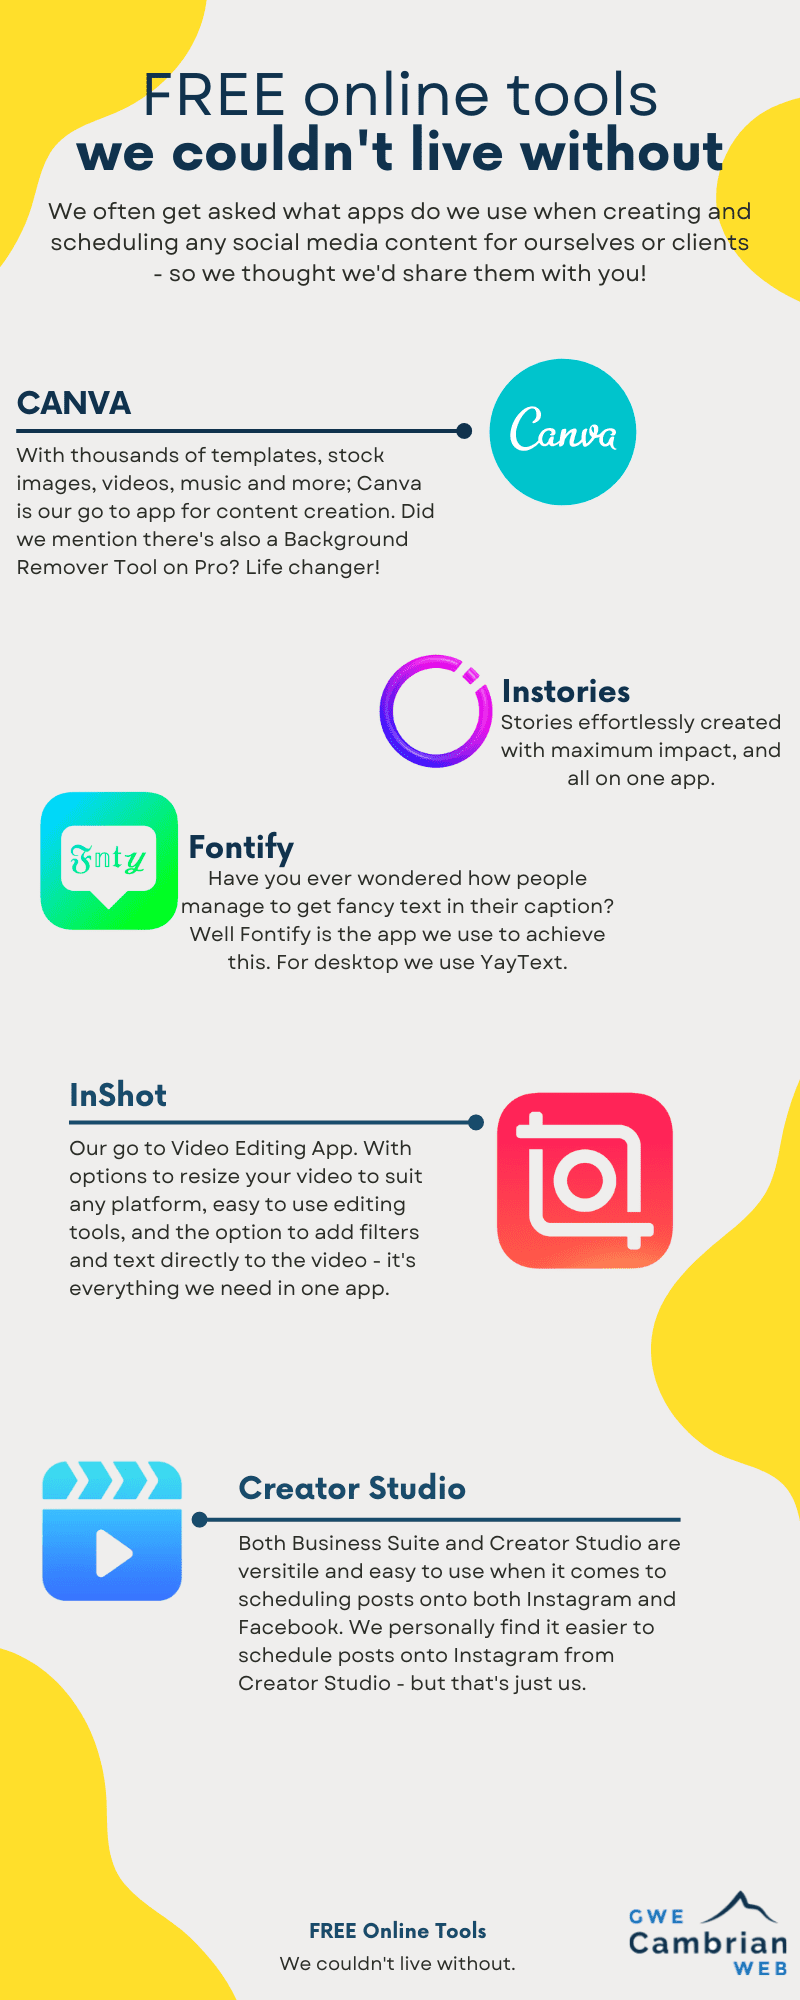 The infographic showcases the 5 apps we couldn't live without when it comes to crating social media content such as stories, posts, Reels, video content and more. The apps mentioned are Canva, InStories, Fontify, Inshot and Creator Studio / Facebook Business Suite.